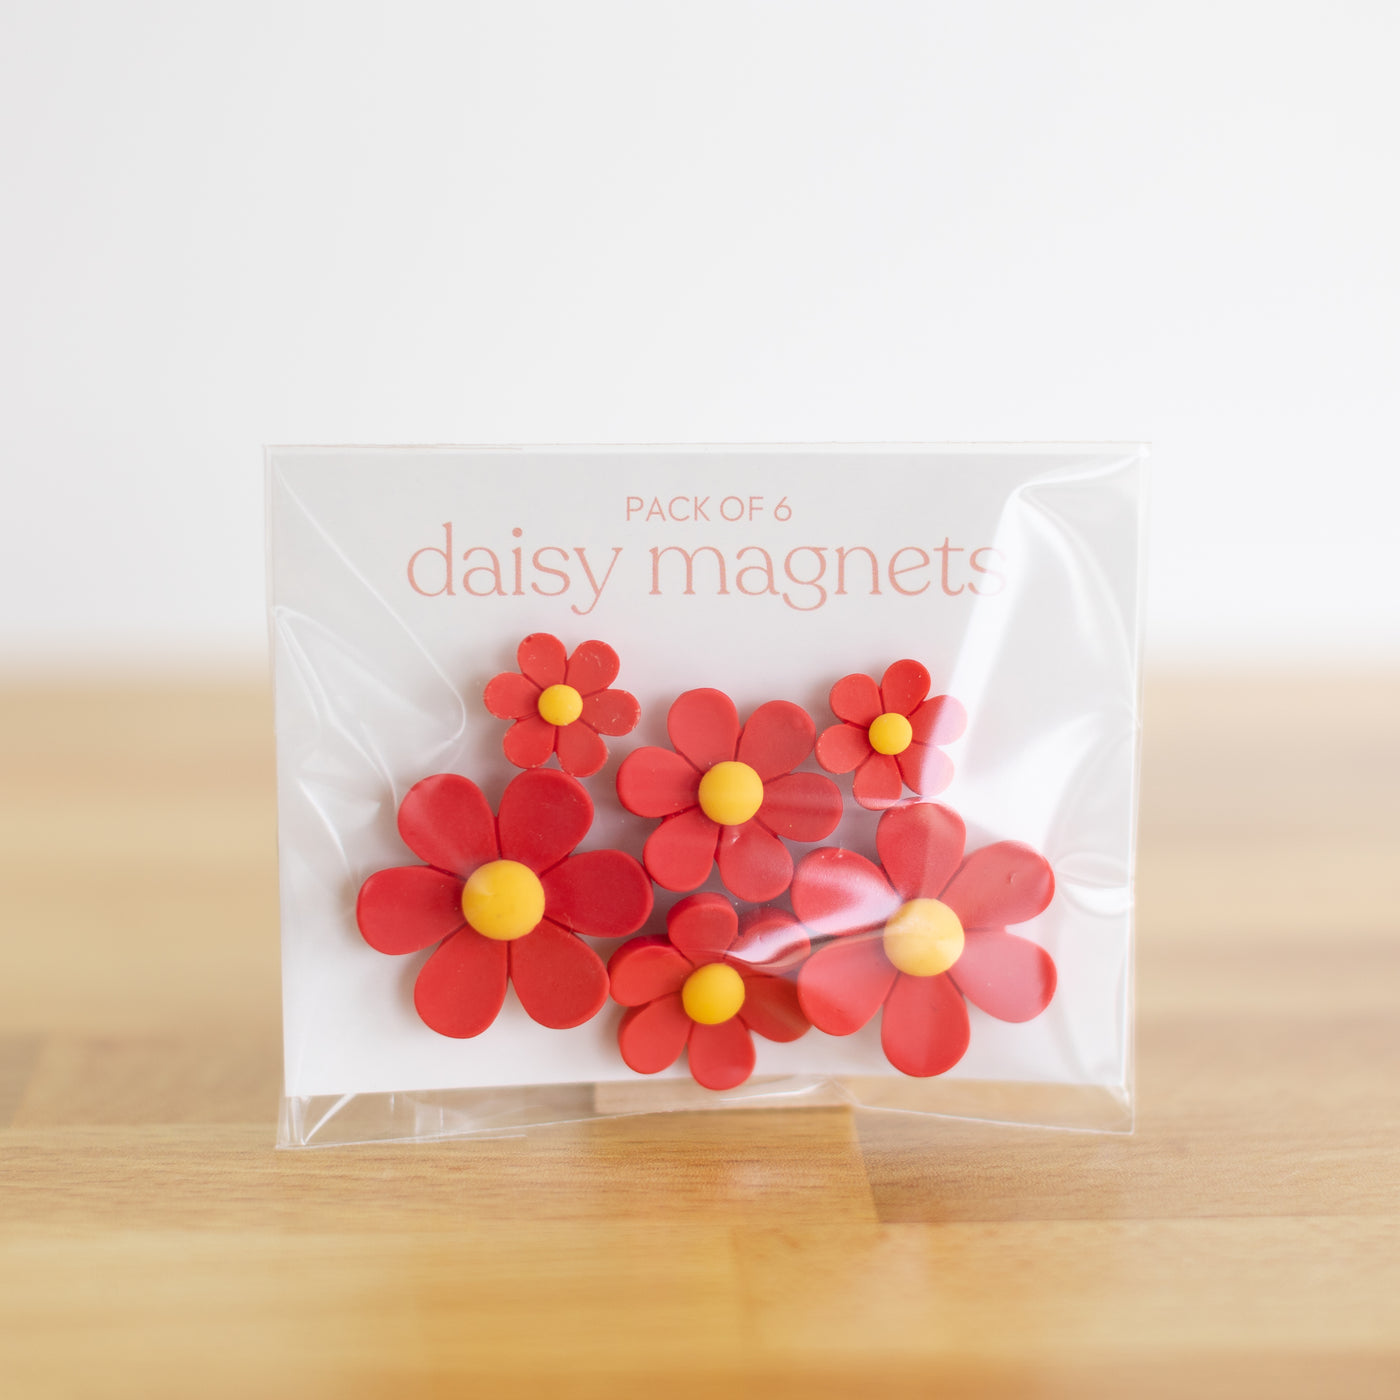 Pack of 6 Daisy Magnets